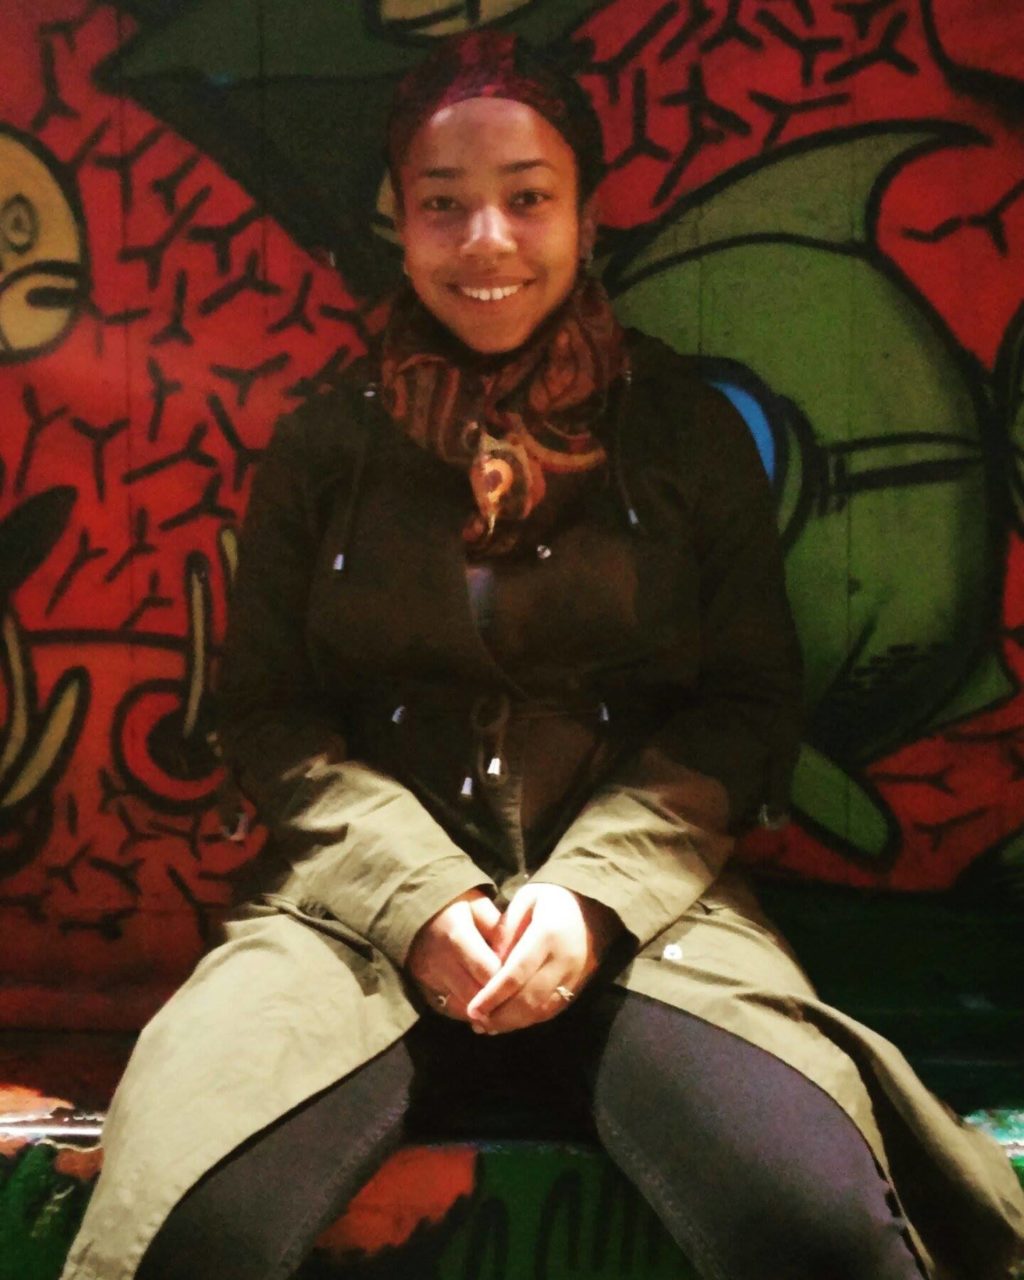 Jade posed and smiling in front of a graffiti wall. 